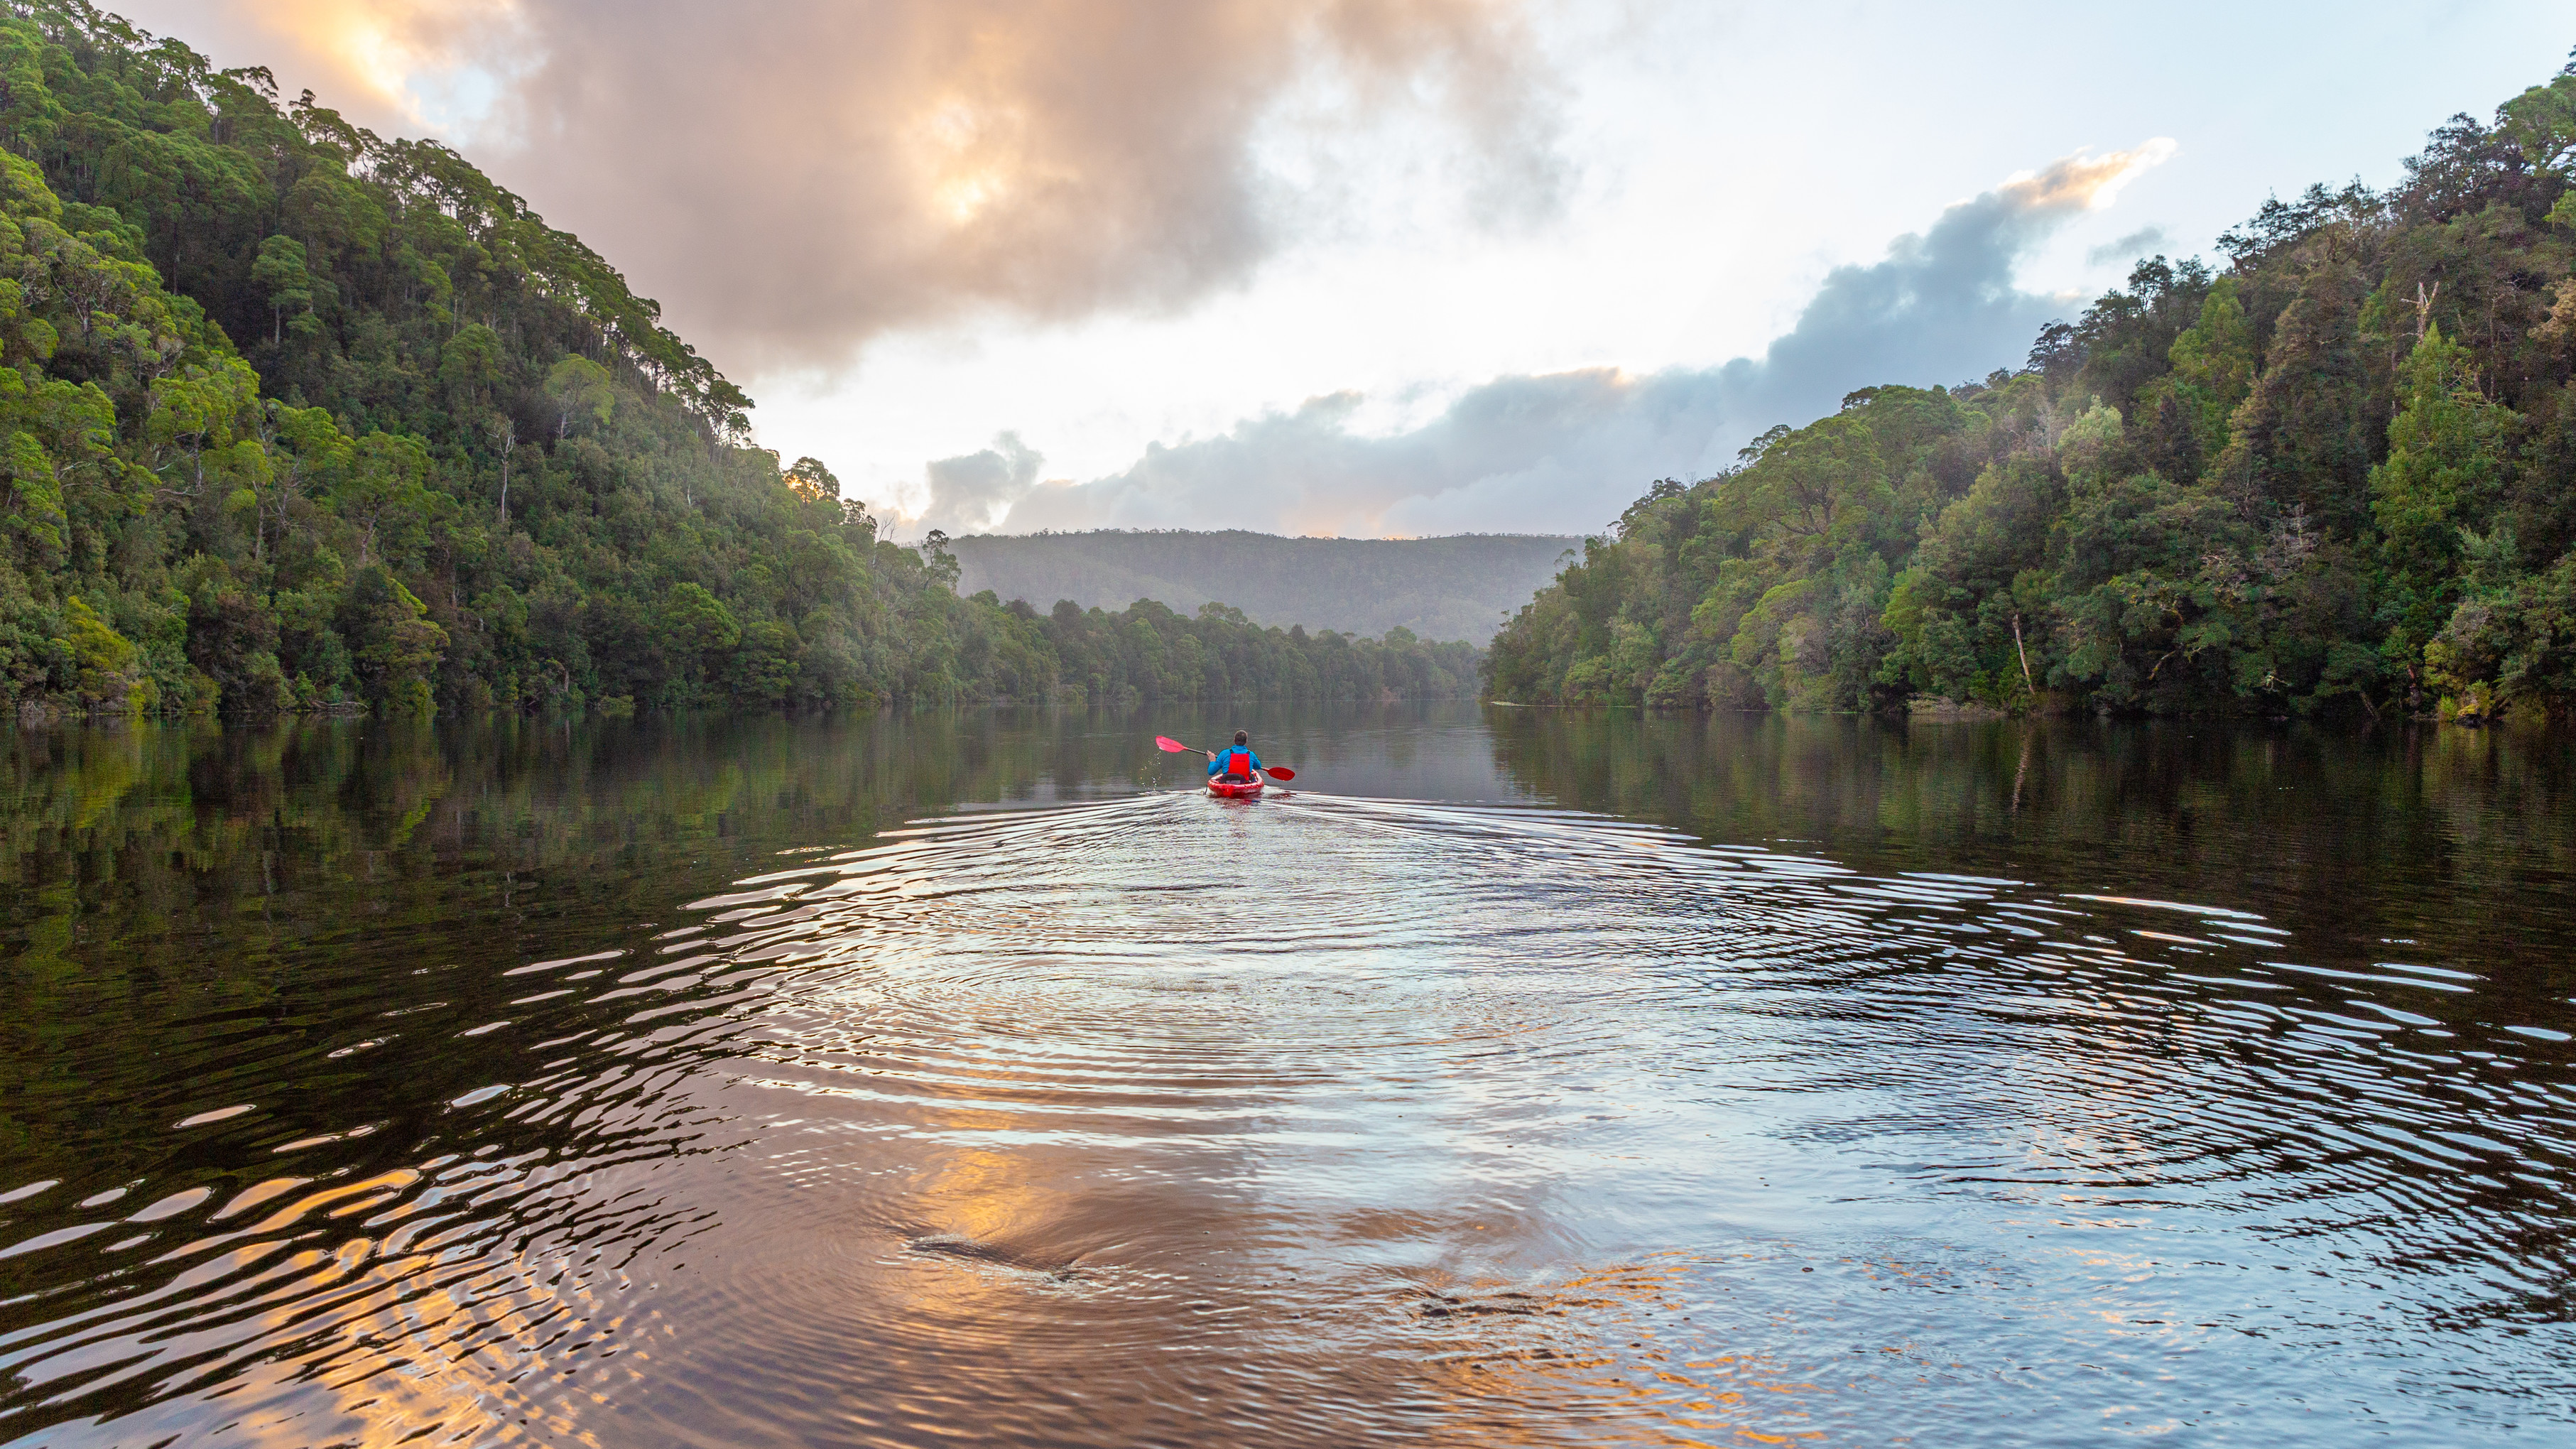 People Kayaking on the Pieman River. The river is mirror-like and reflects the cloud-filled sky.